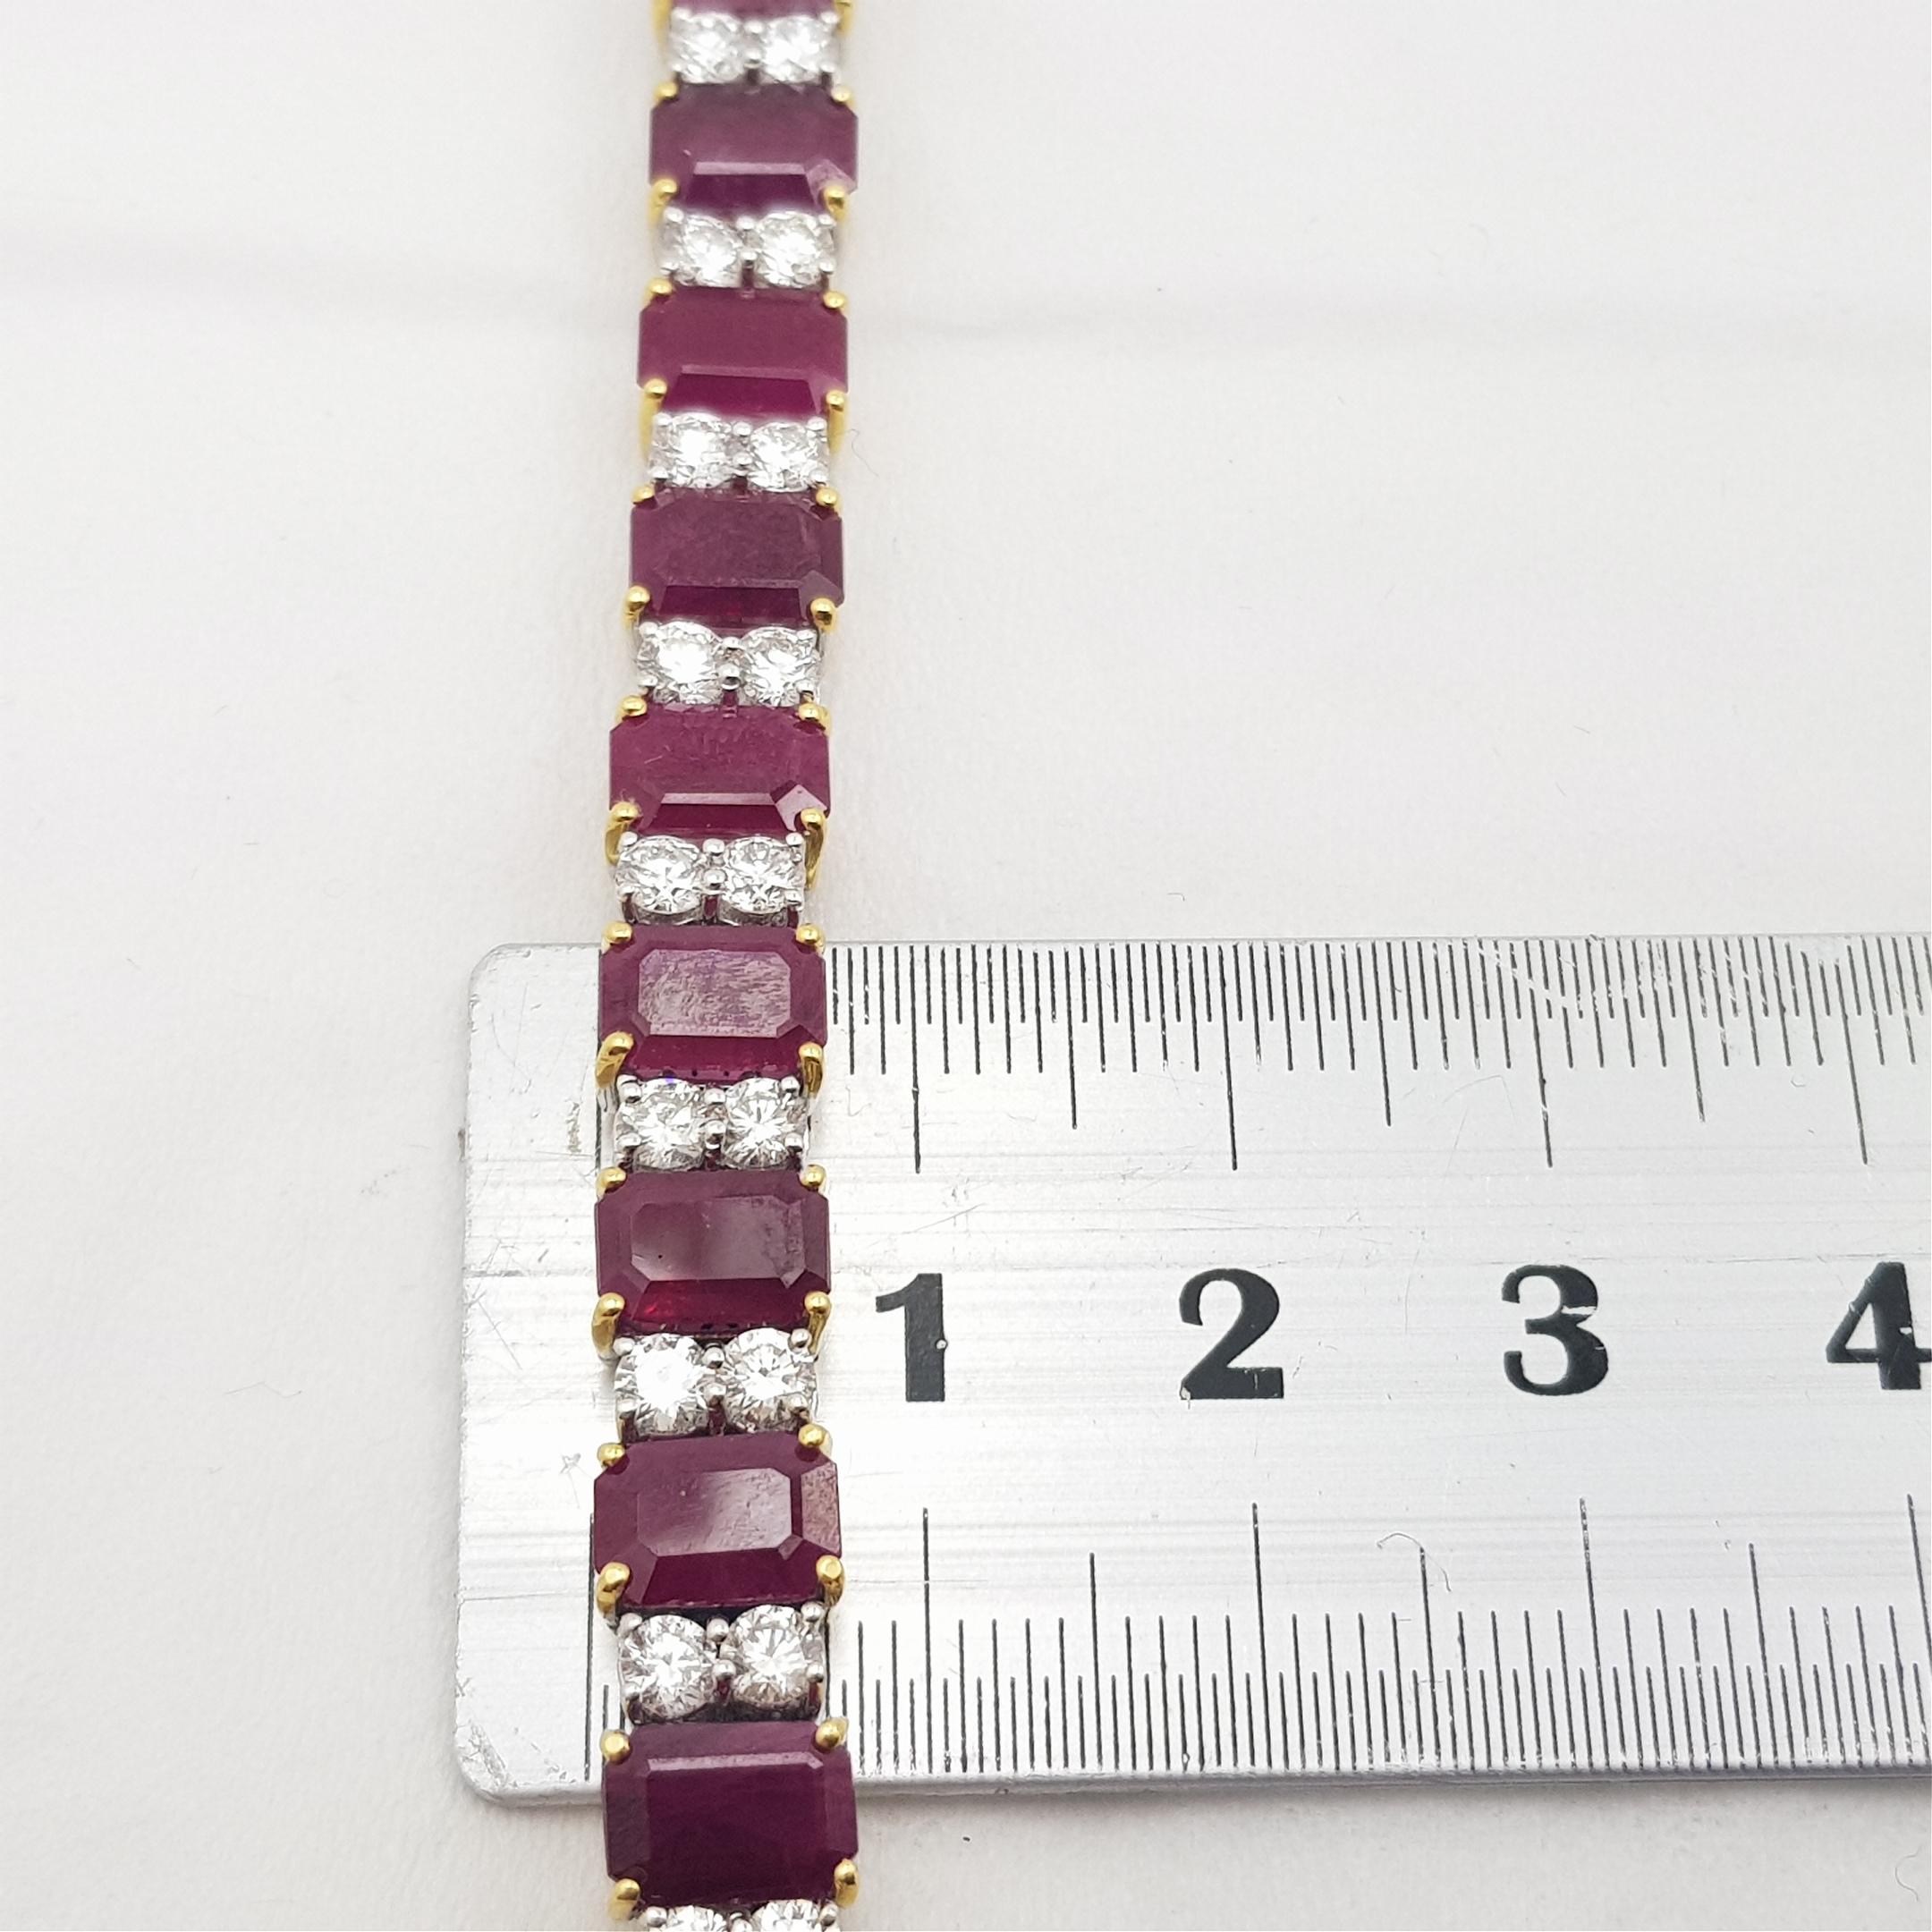 18ct Two Tone Gold Burmese Ruby & 4.5ct TW Diamond Bracelet Val $62765 AUD For Sale 6